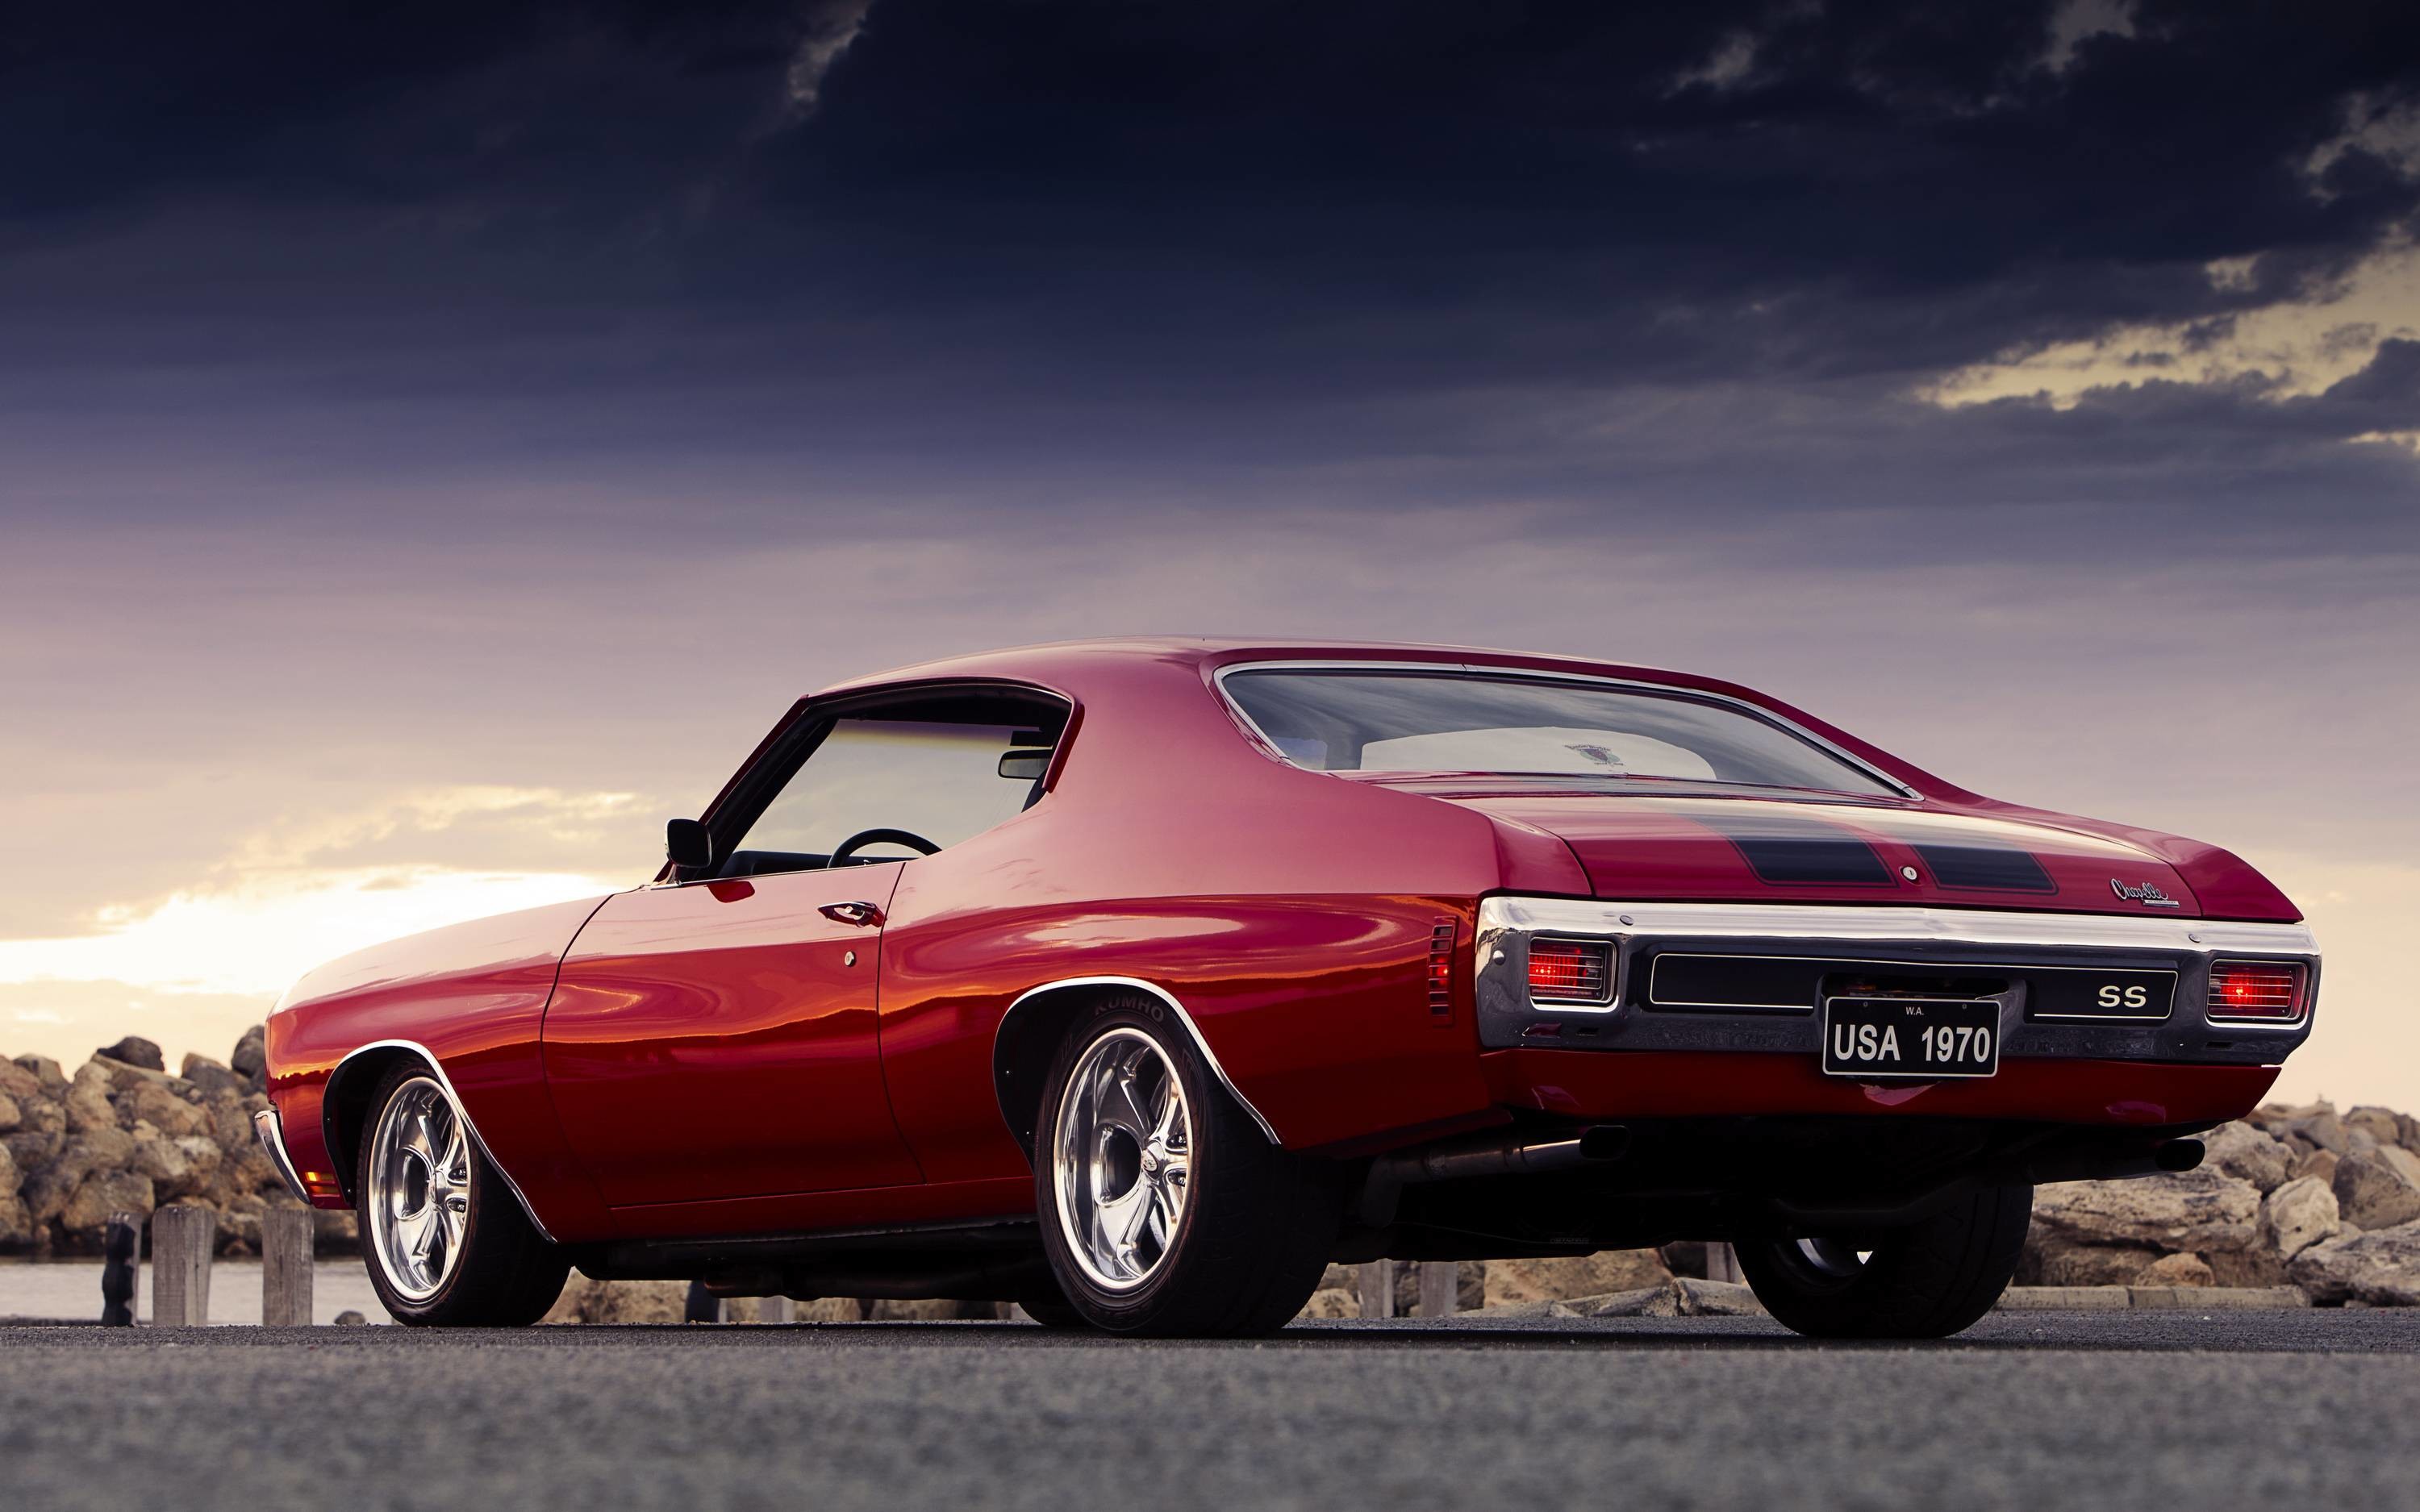 1970 Chevelle Ss 454 Wallpaper 75 images 3000x1875